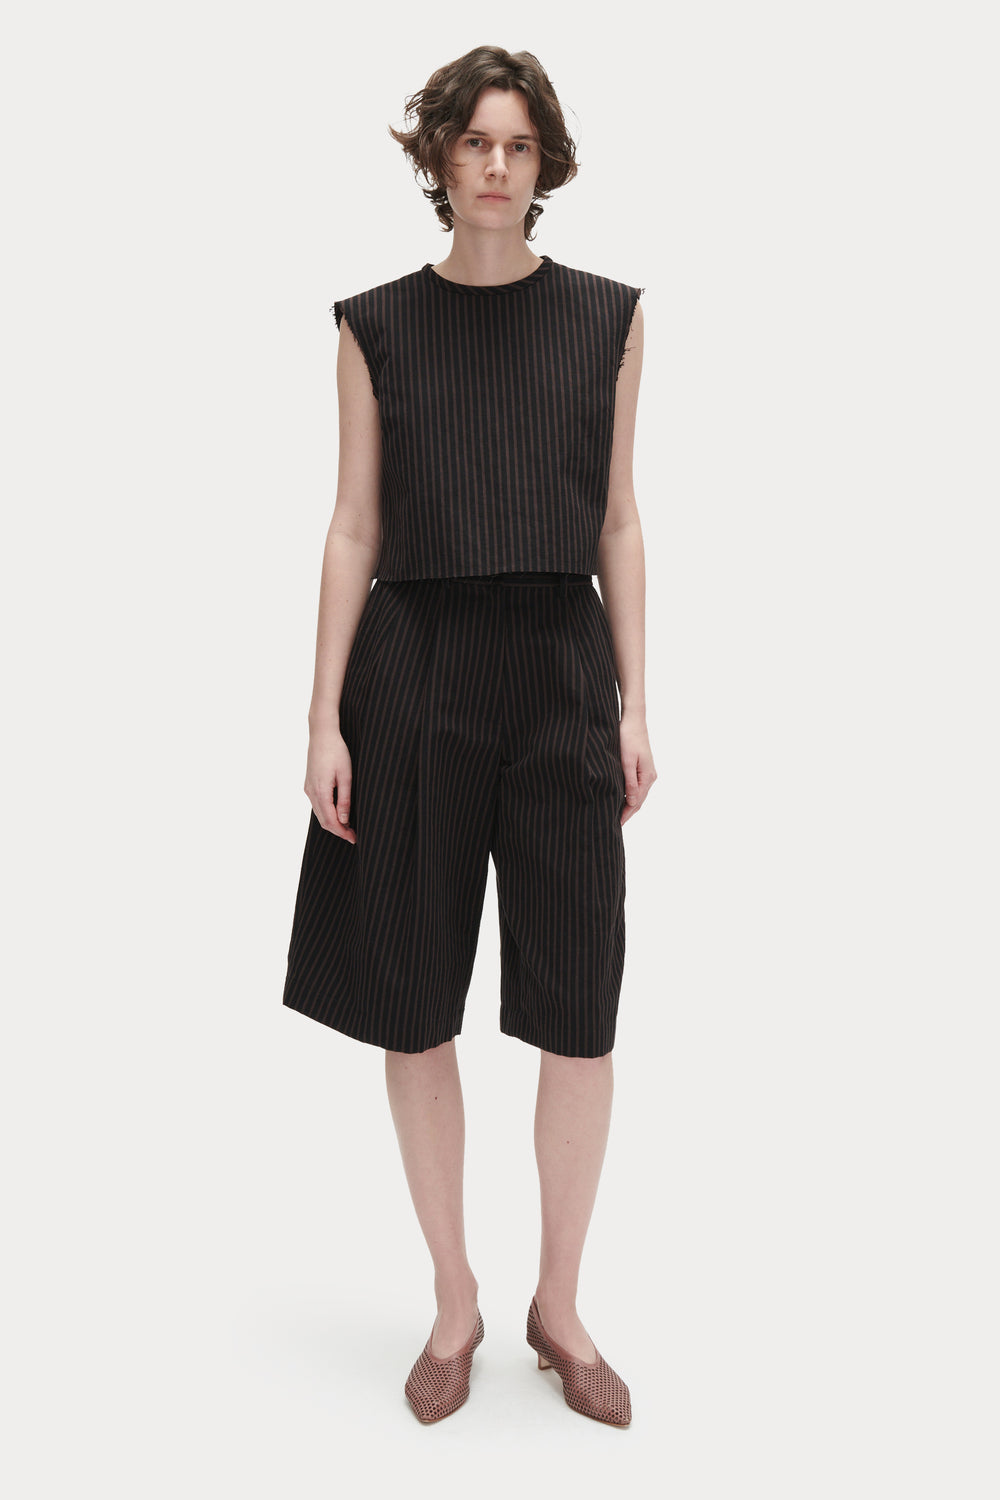 Skirts and Shorts | Rachel Comey